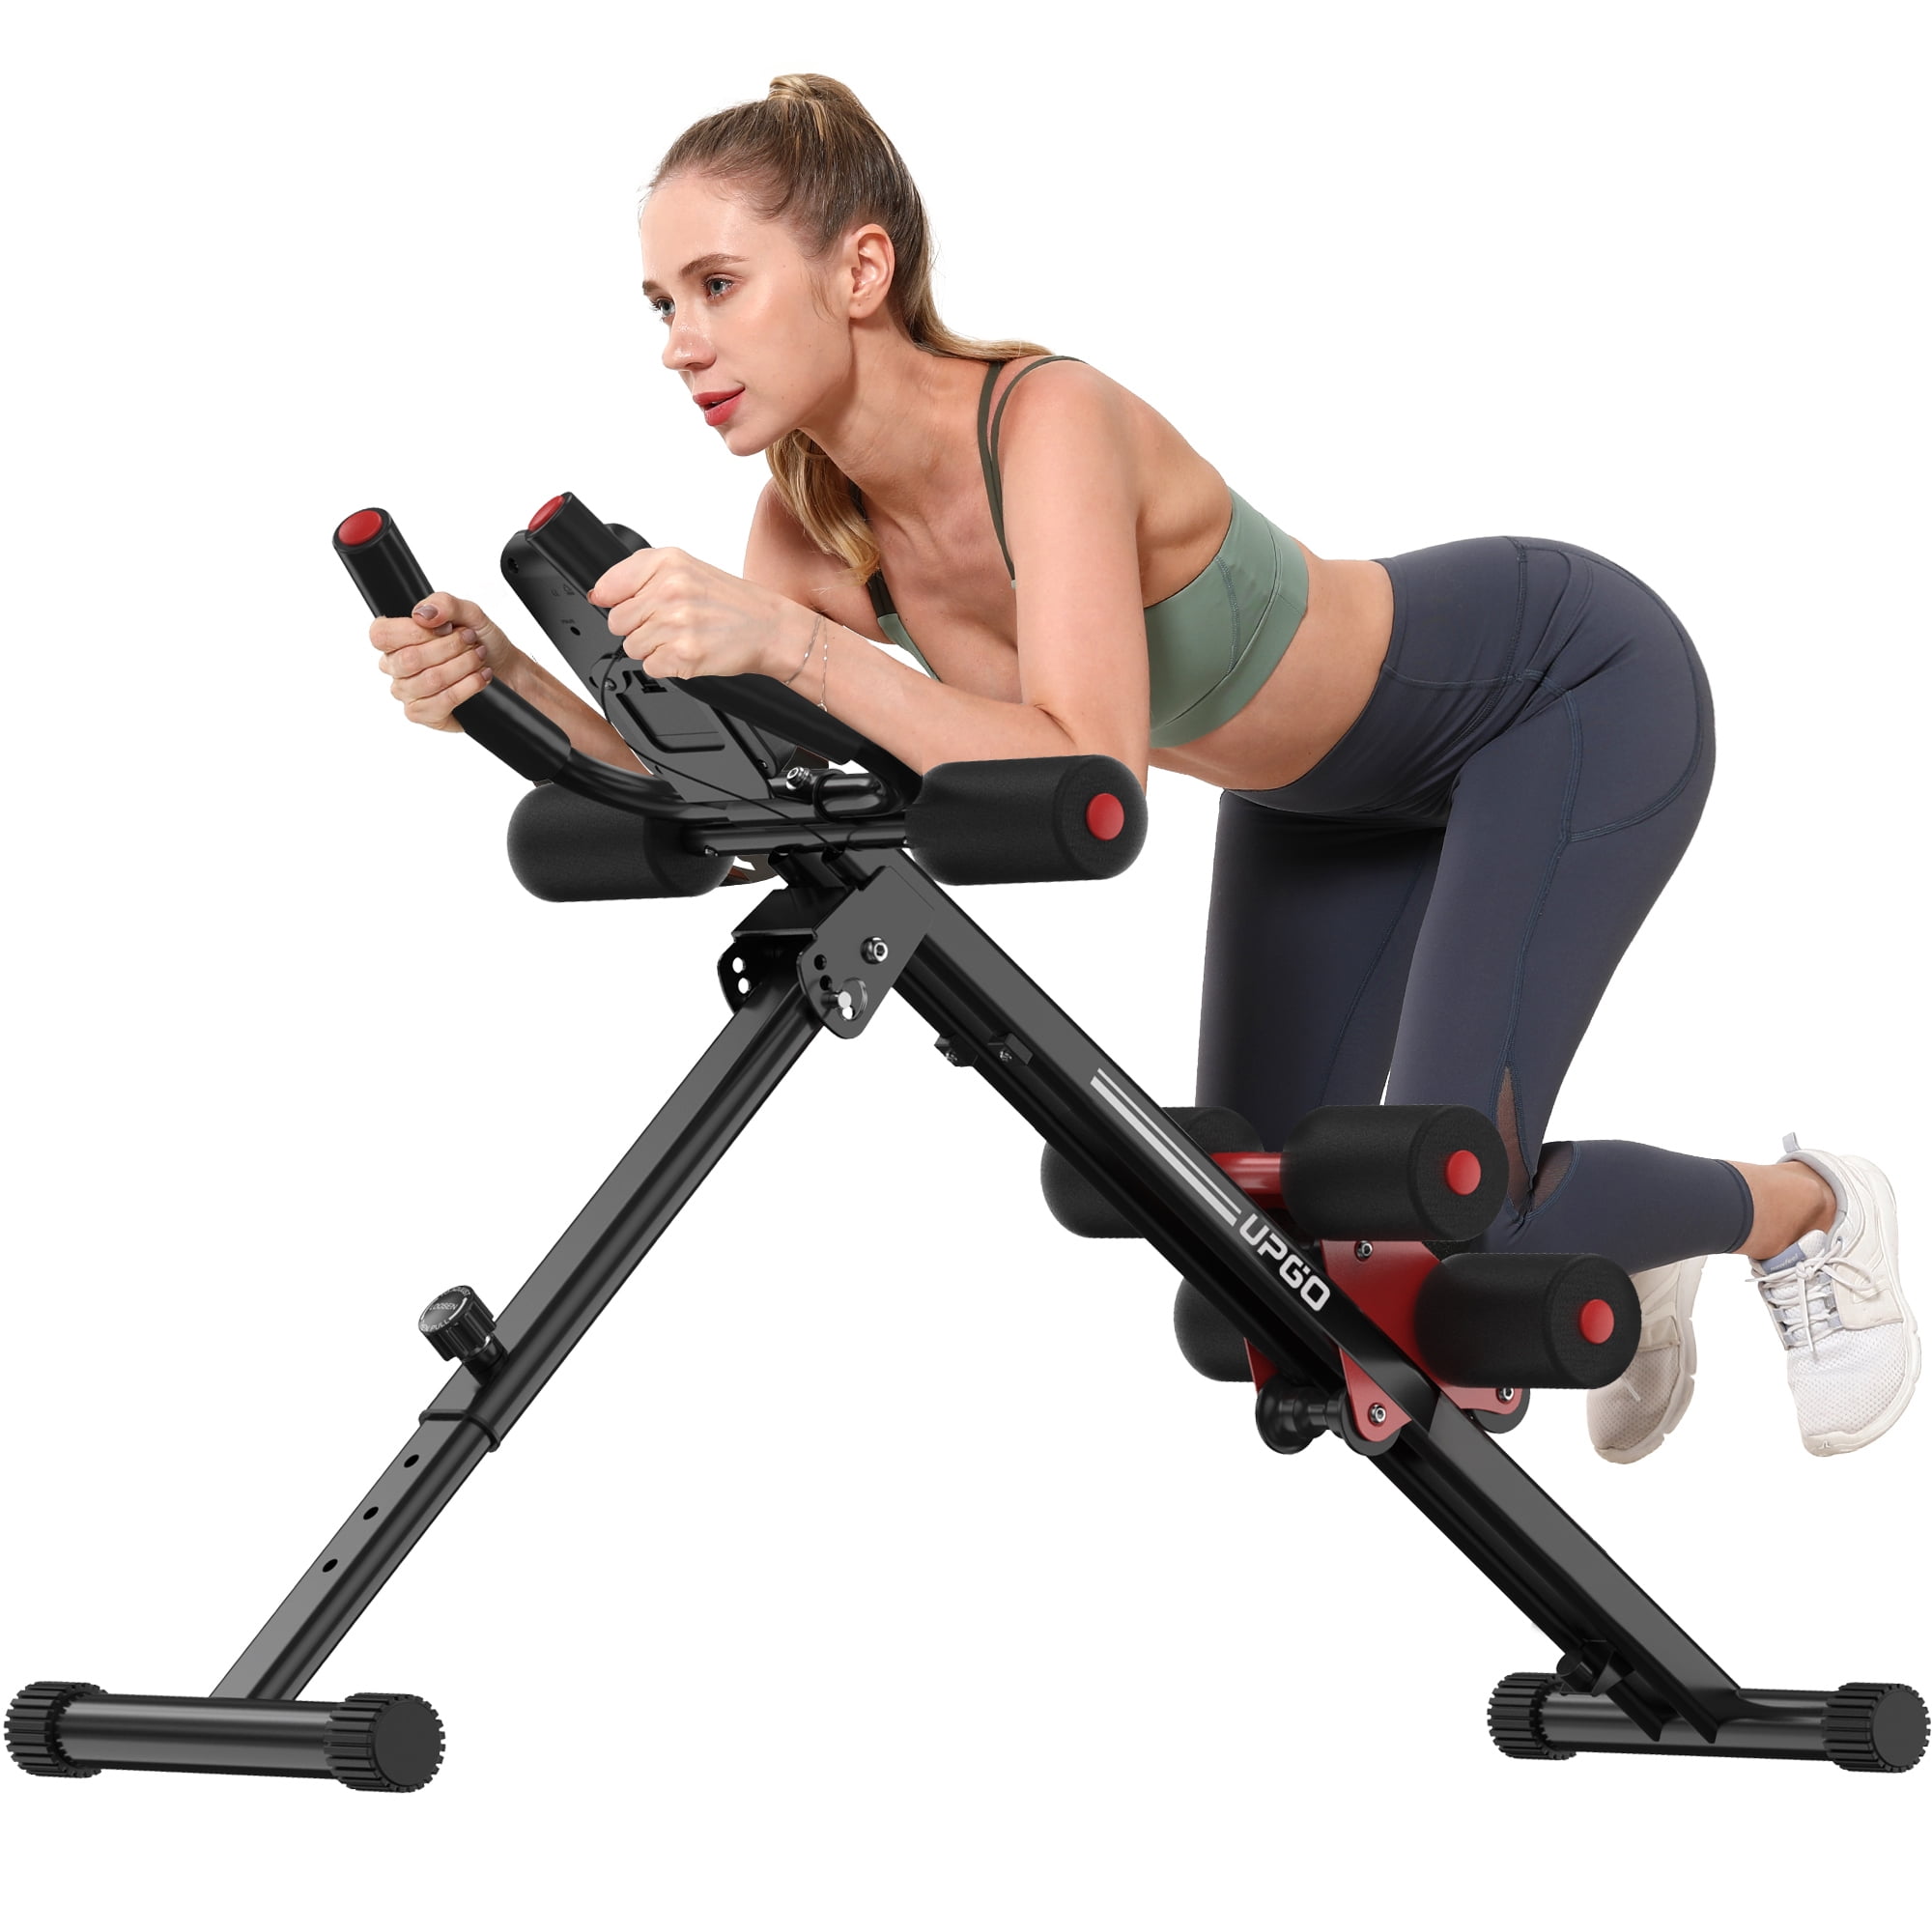 UPGO Ab Workout Equipment, Adjustable Ab Machine Full Body Workout for Home  Gym, Strength Training Exercise Equipment for Body Shaping Foldable Waist